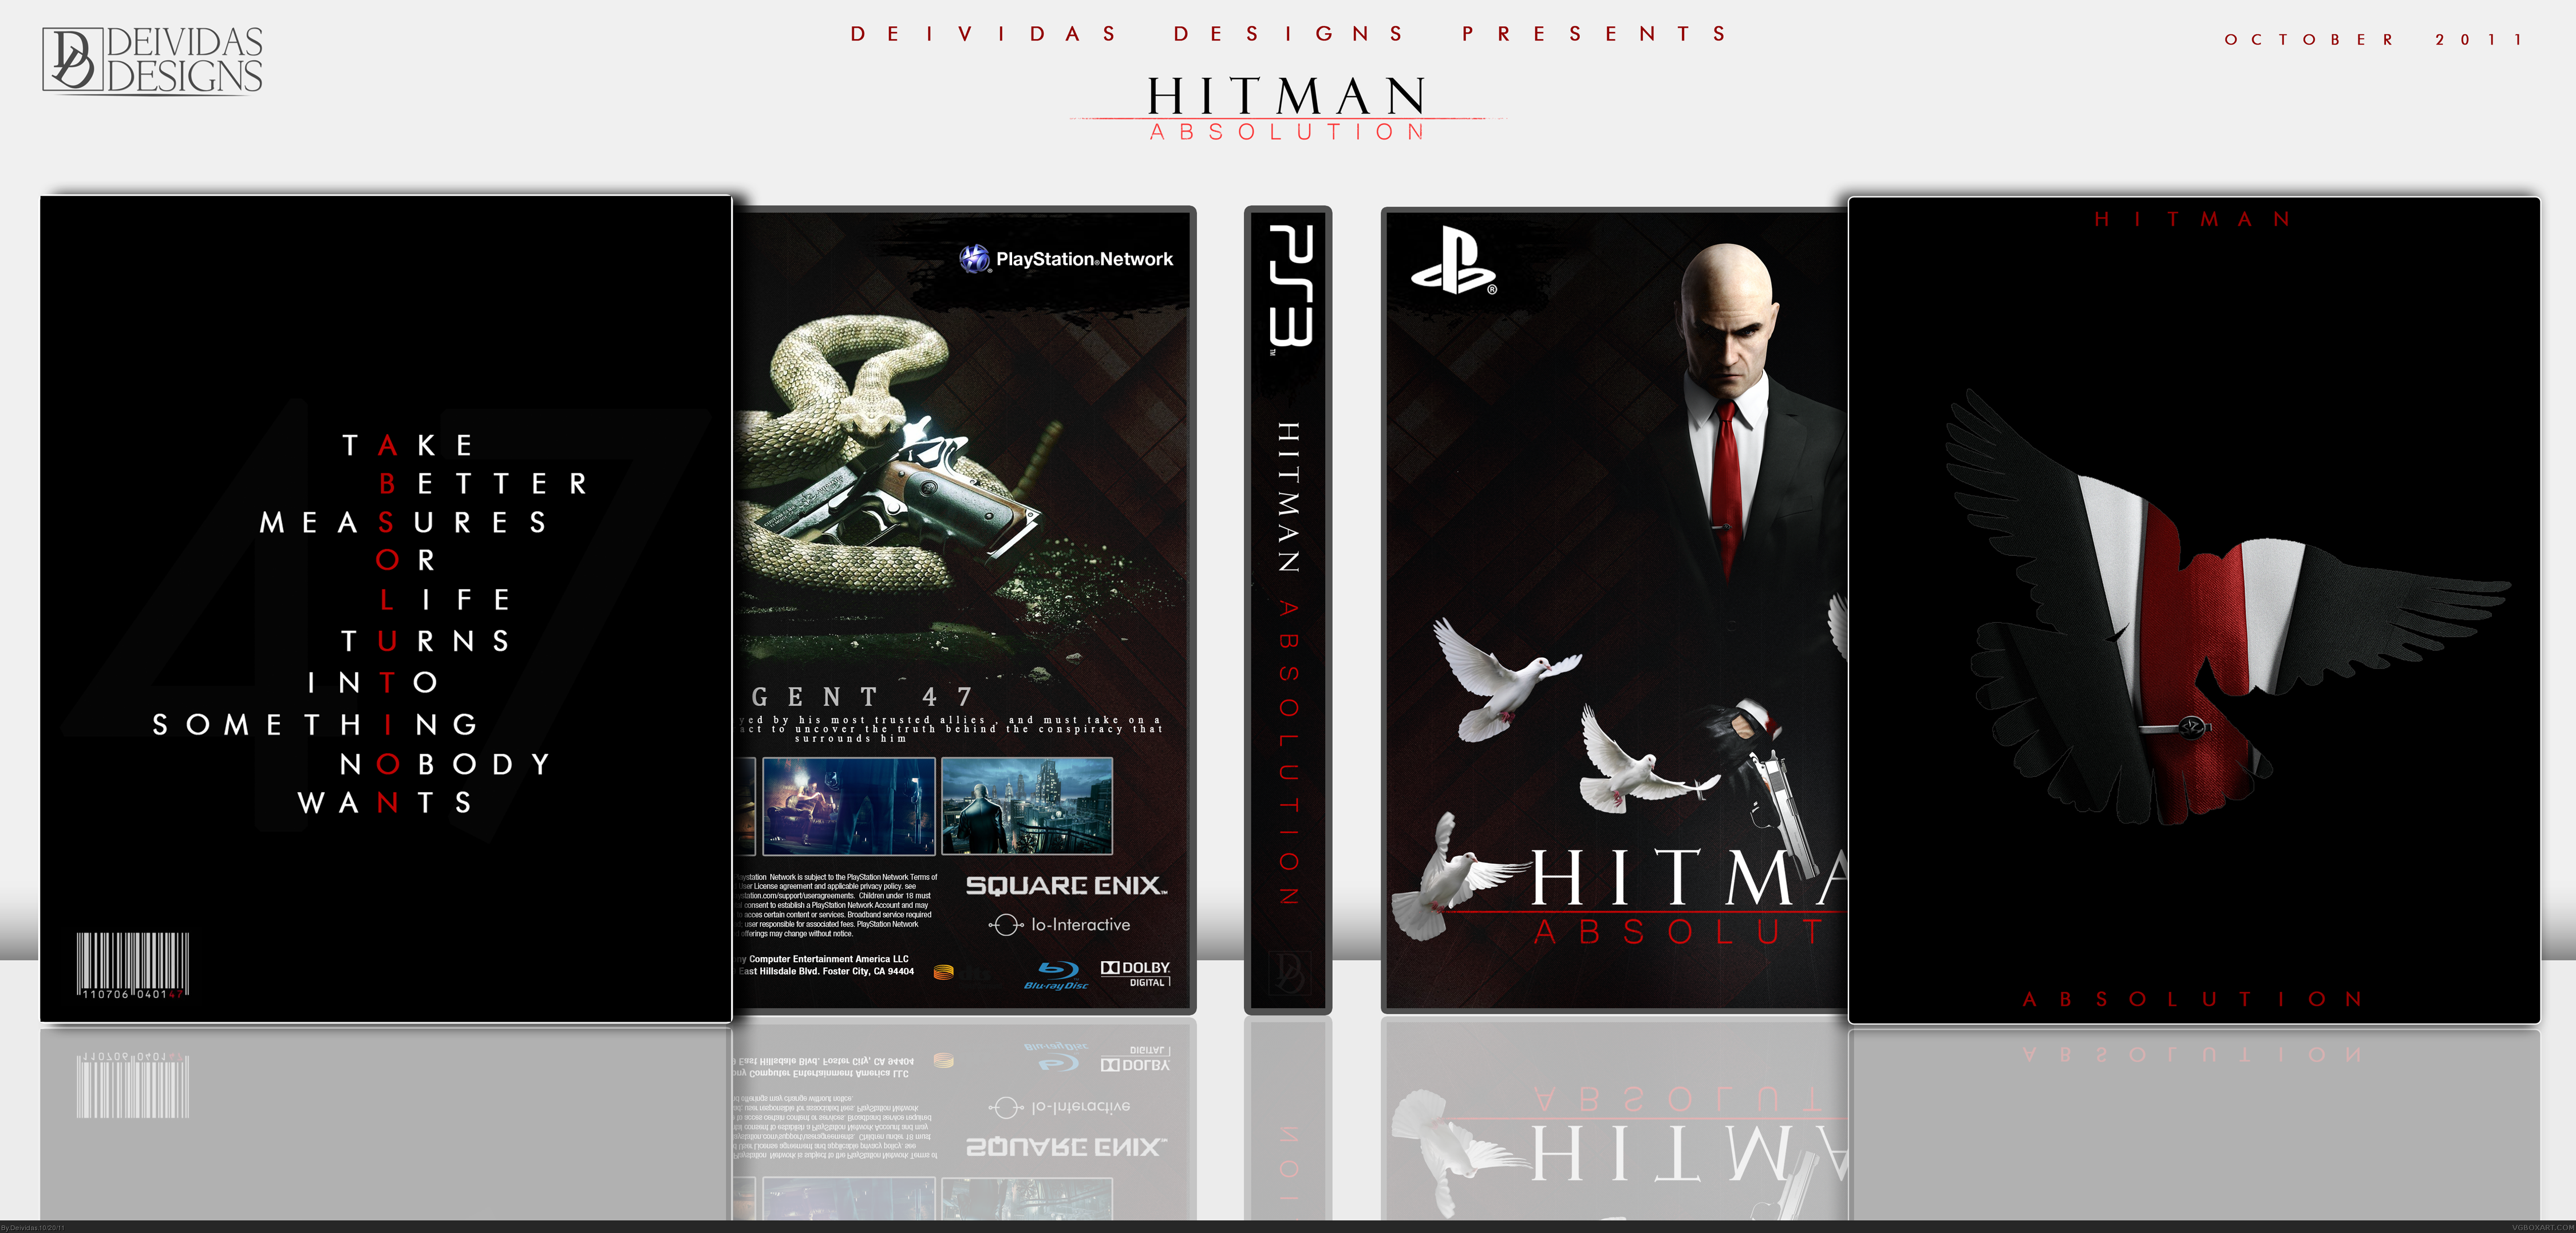 Hitman: Absolution box cover